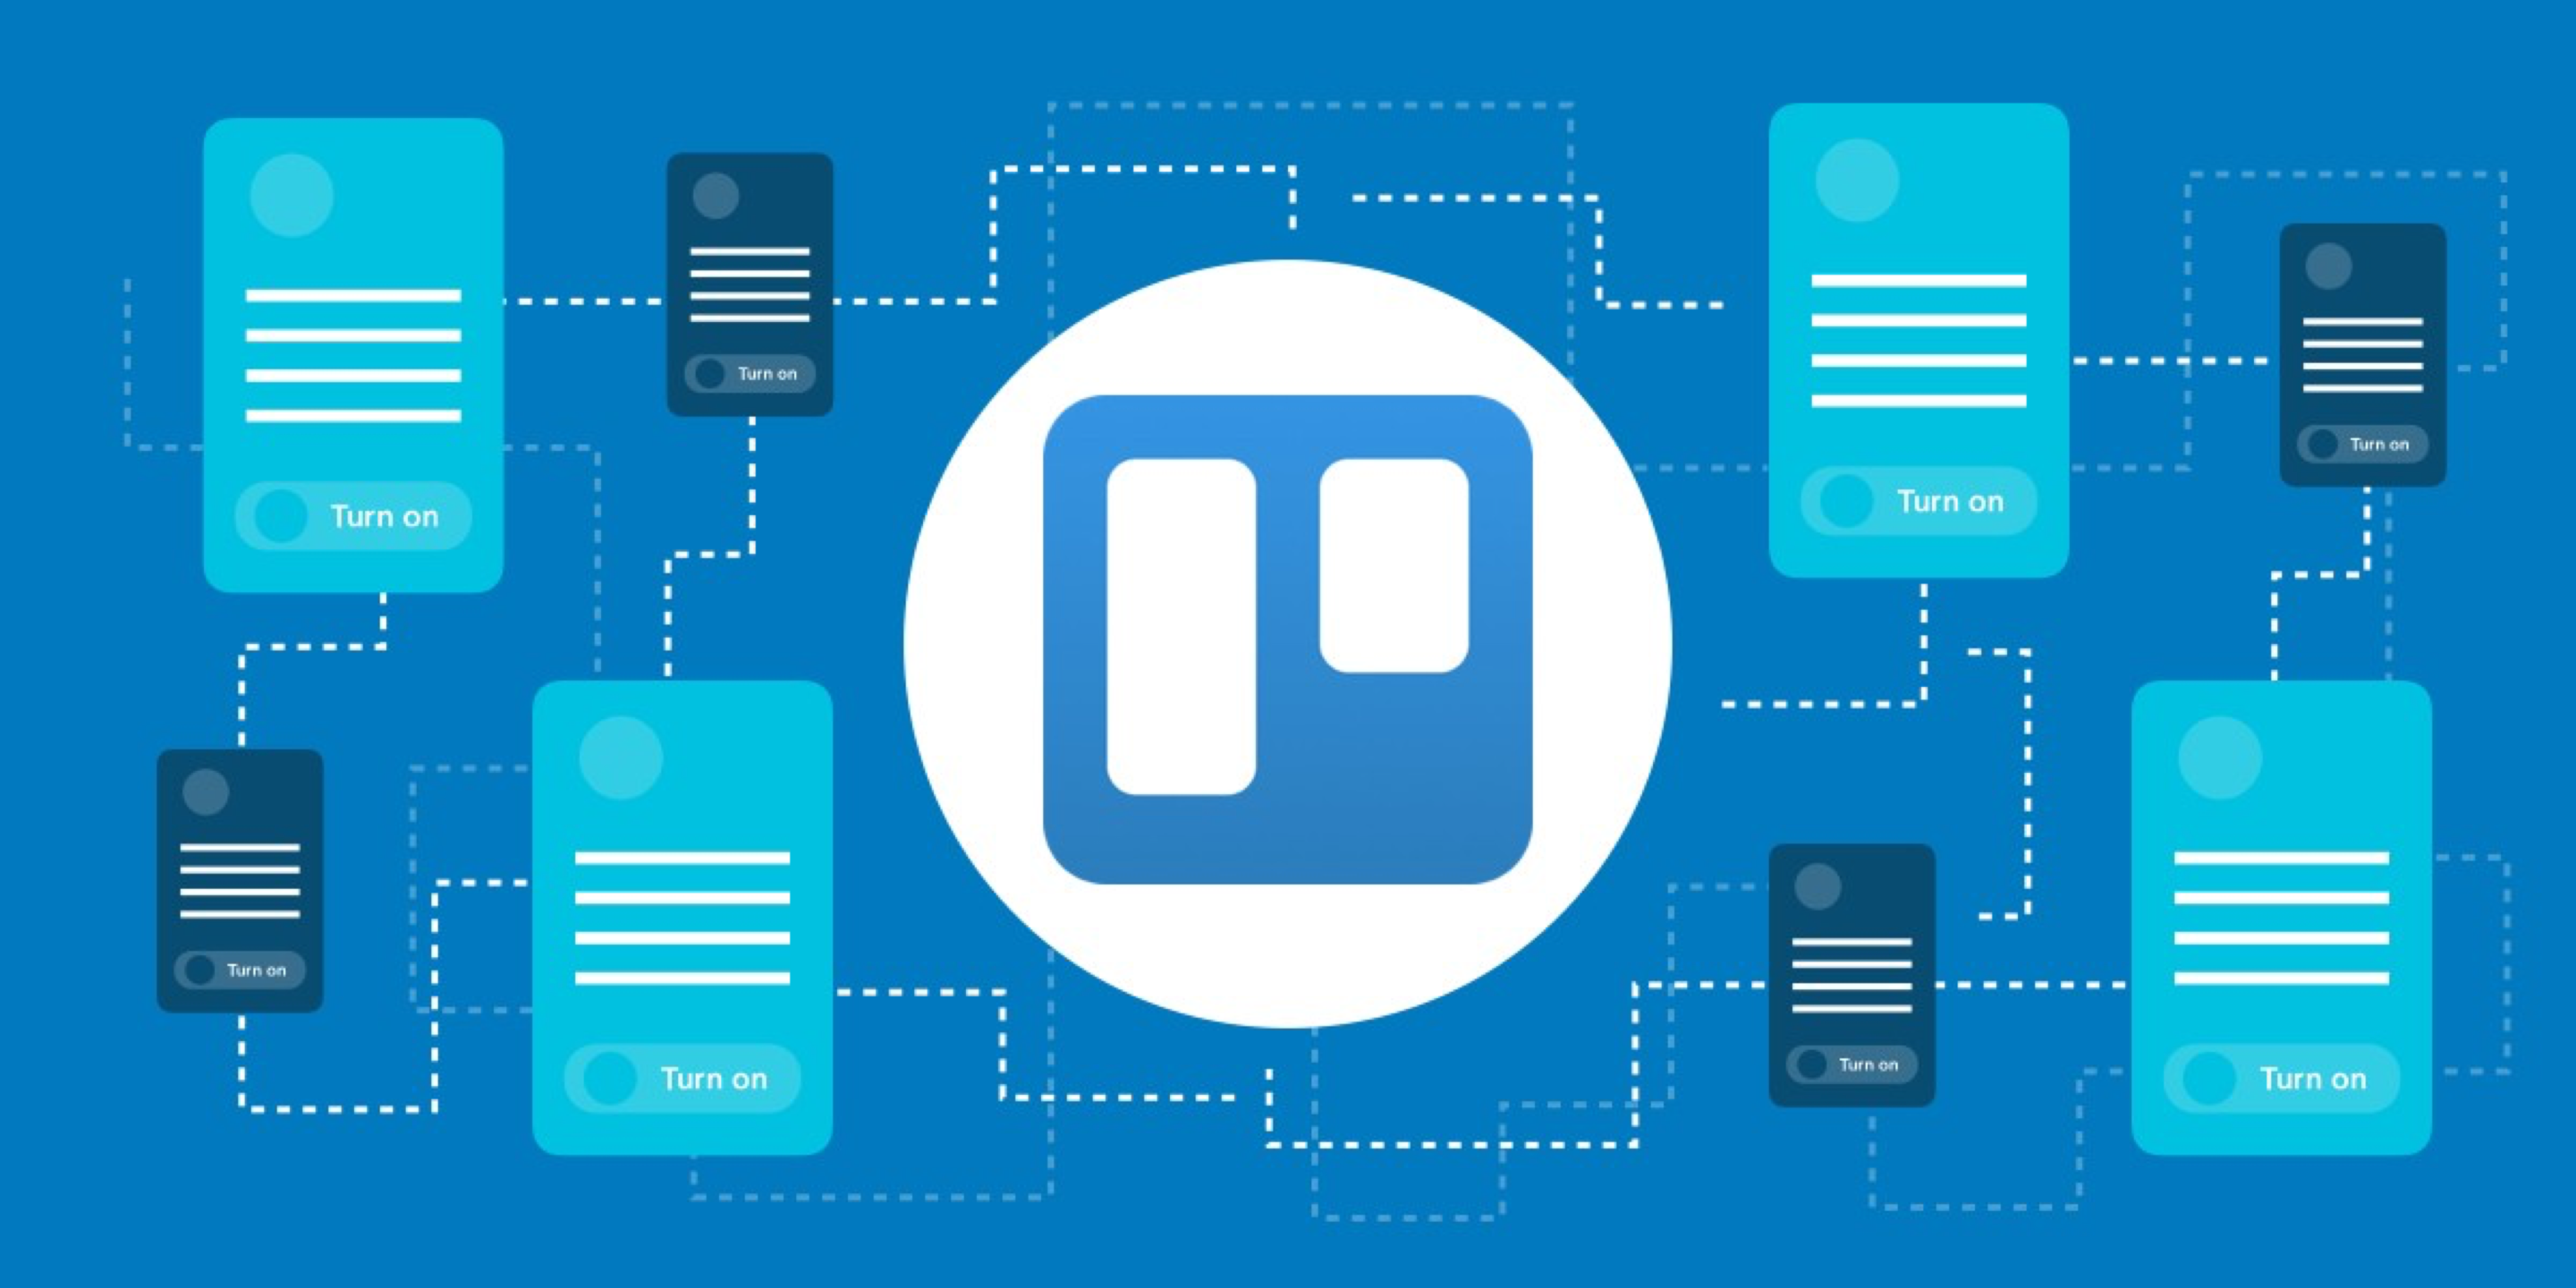 Trello Tips & Tricks to Boost Your Productivity